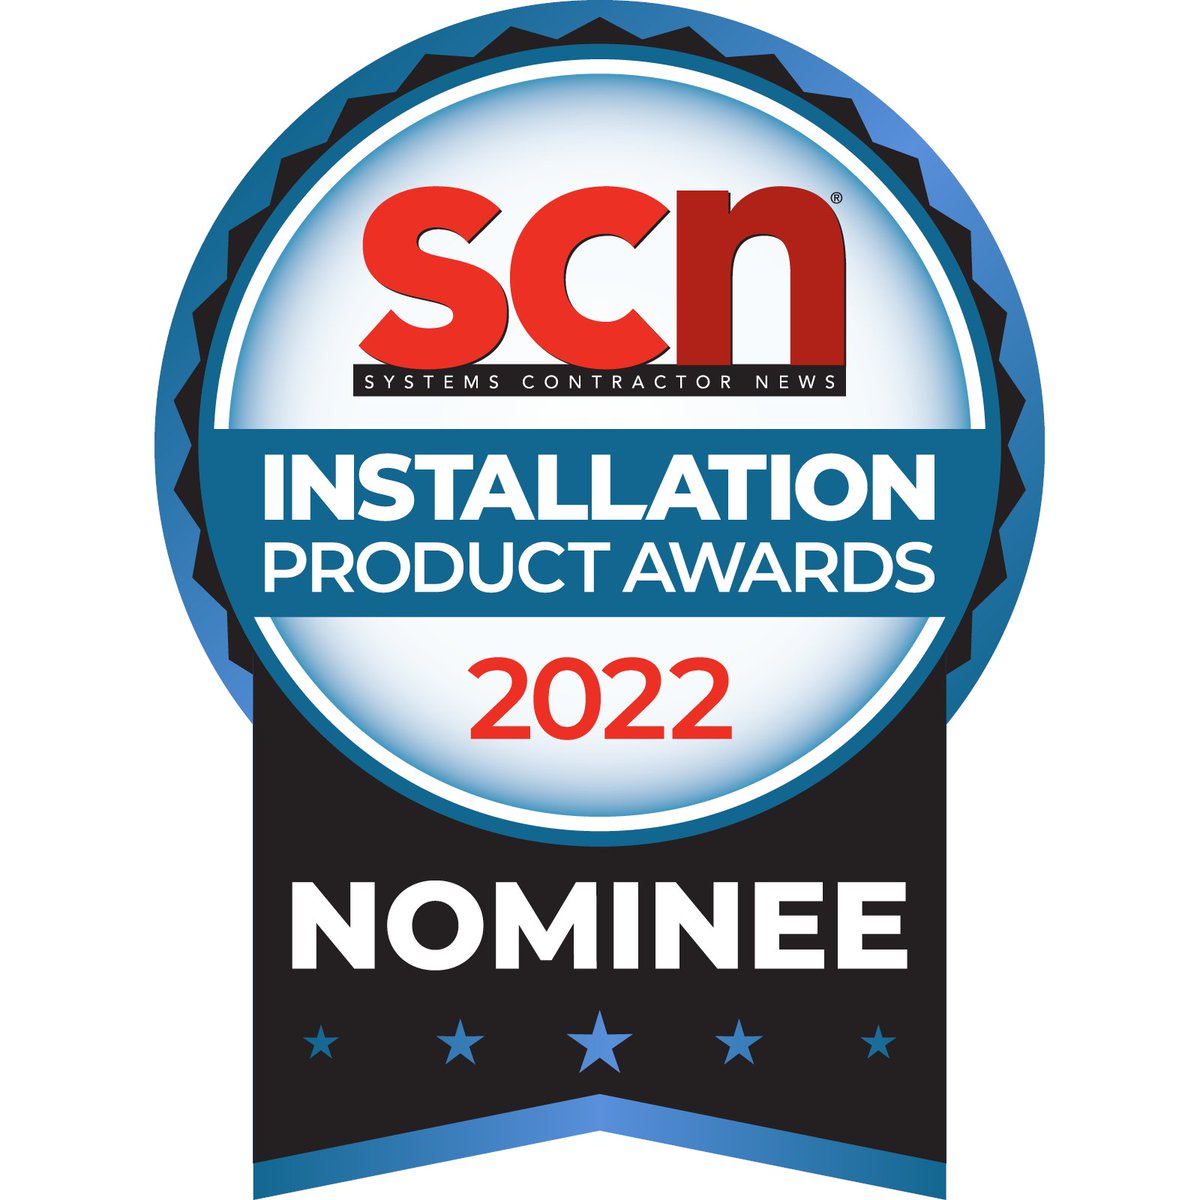 WolfVision's new Cynap Pure Mini #BYOD #wirelesspresentation system is nominated for an SCN Installation Product Award in the 'Most Innovative Collaboration Product' category. Voting is only until 27th May so please use this link now and vote for us: marketing.wolfvision.com/vote-for-cynap…